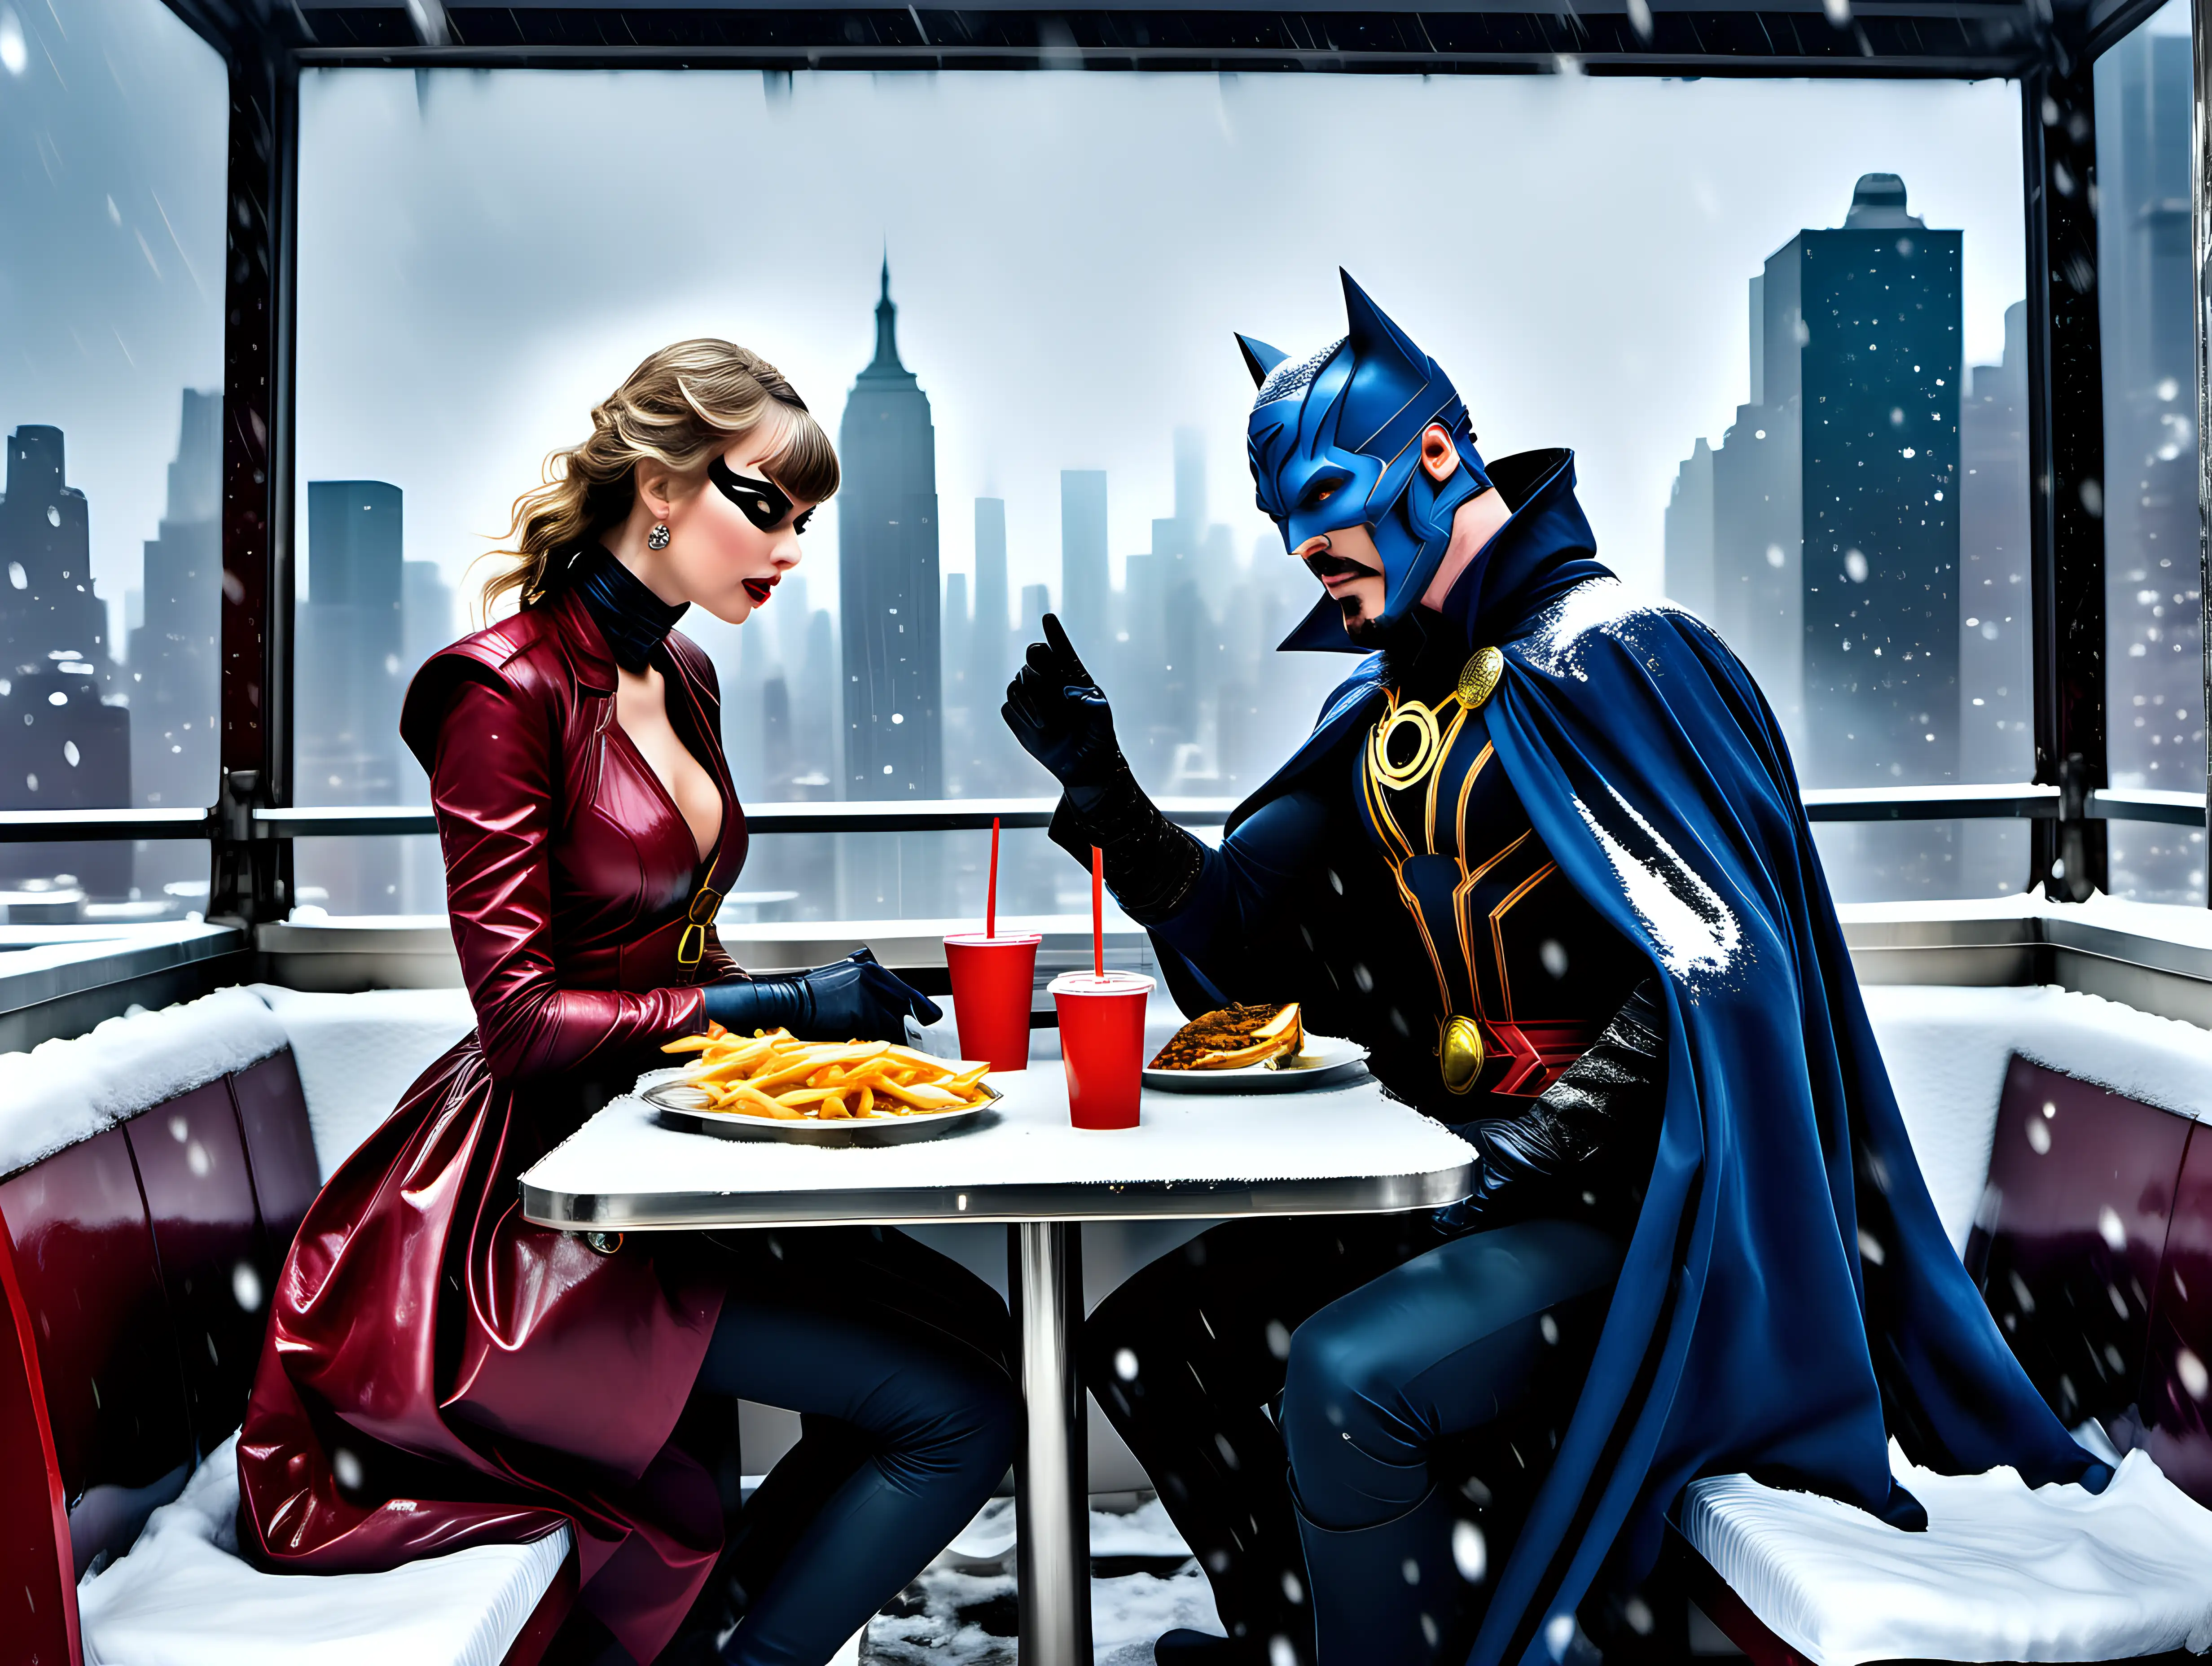 Taylor Swift and Doctor Strange Enjoy Romantic Fast Food Date Amidst NYC Snowstorm